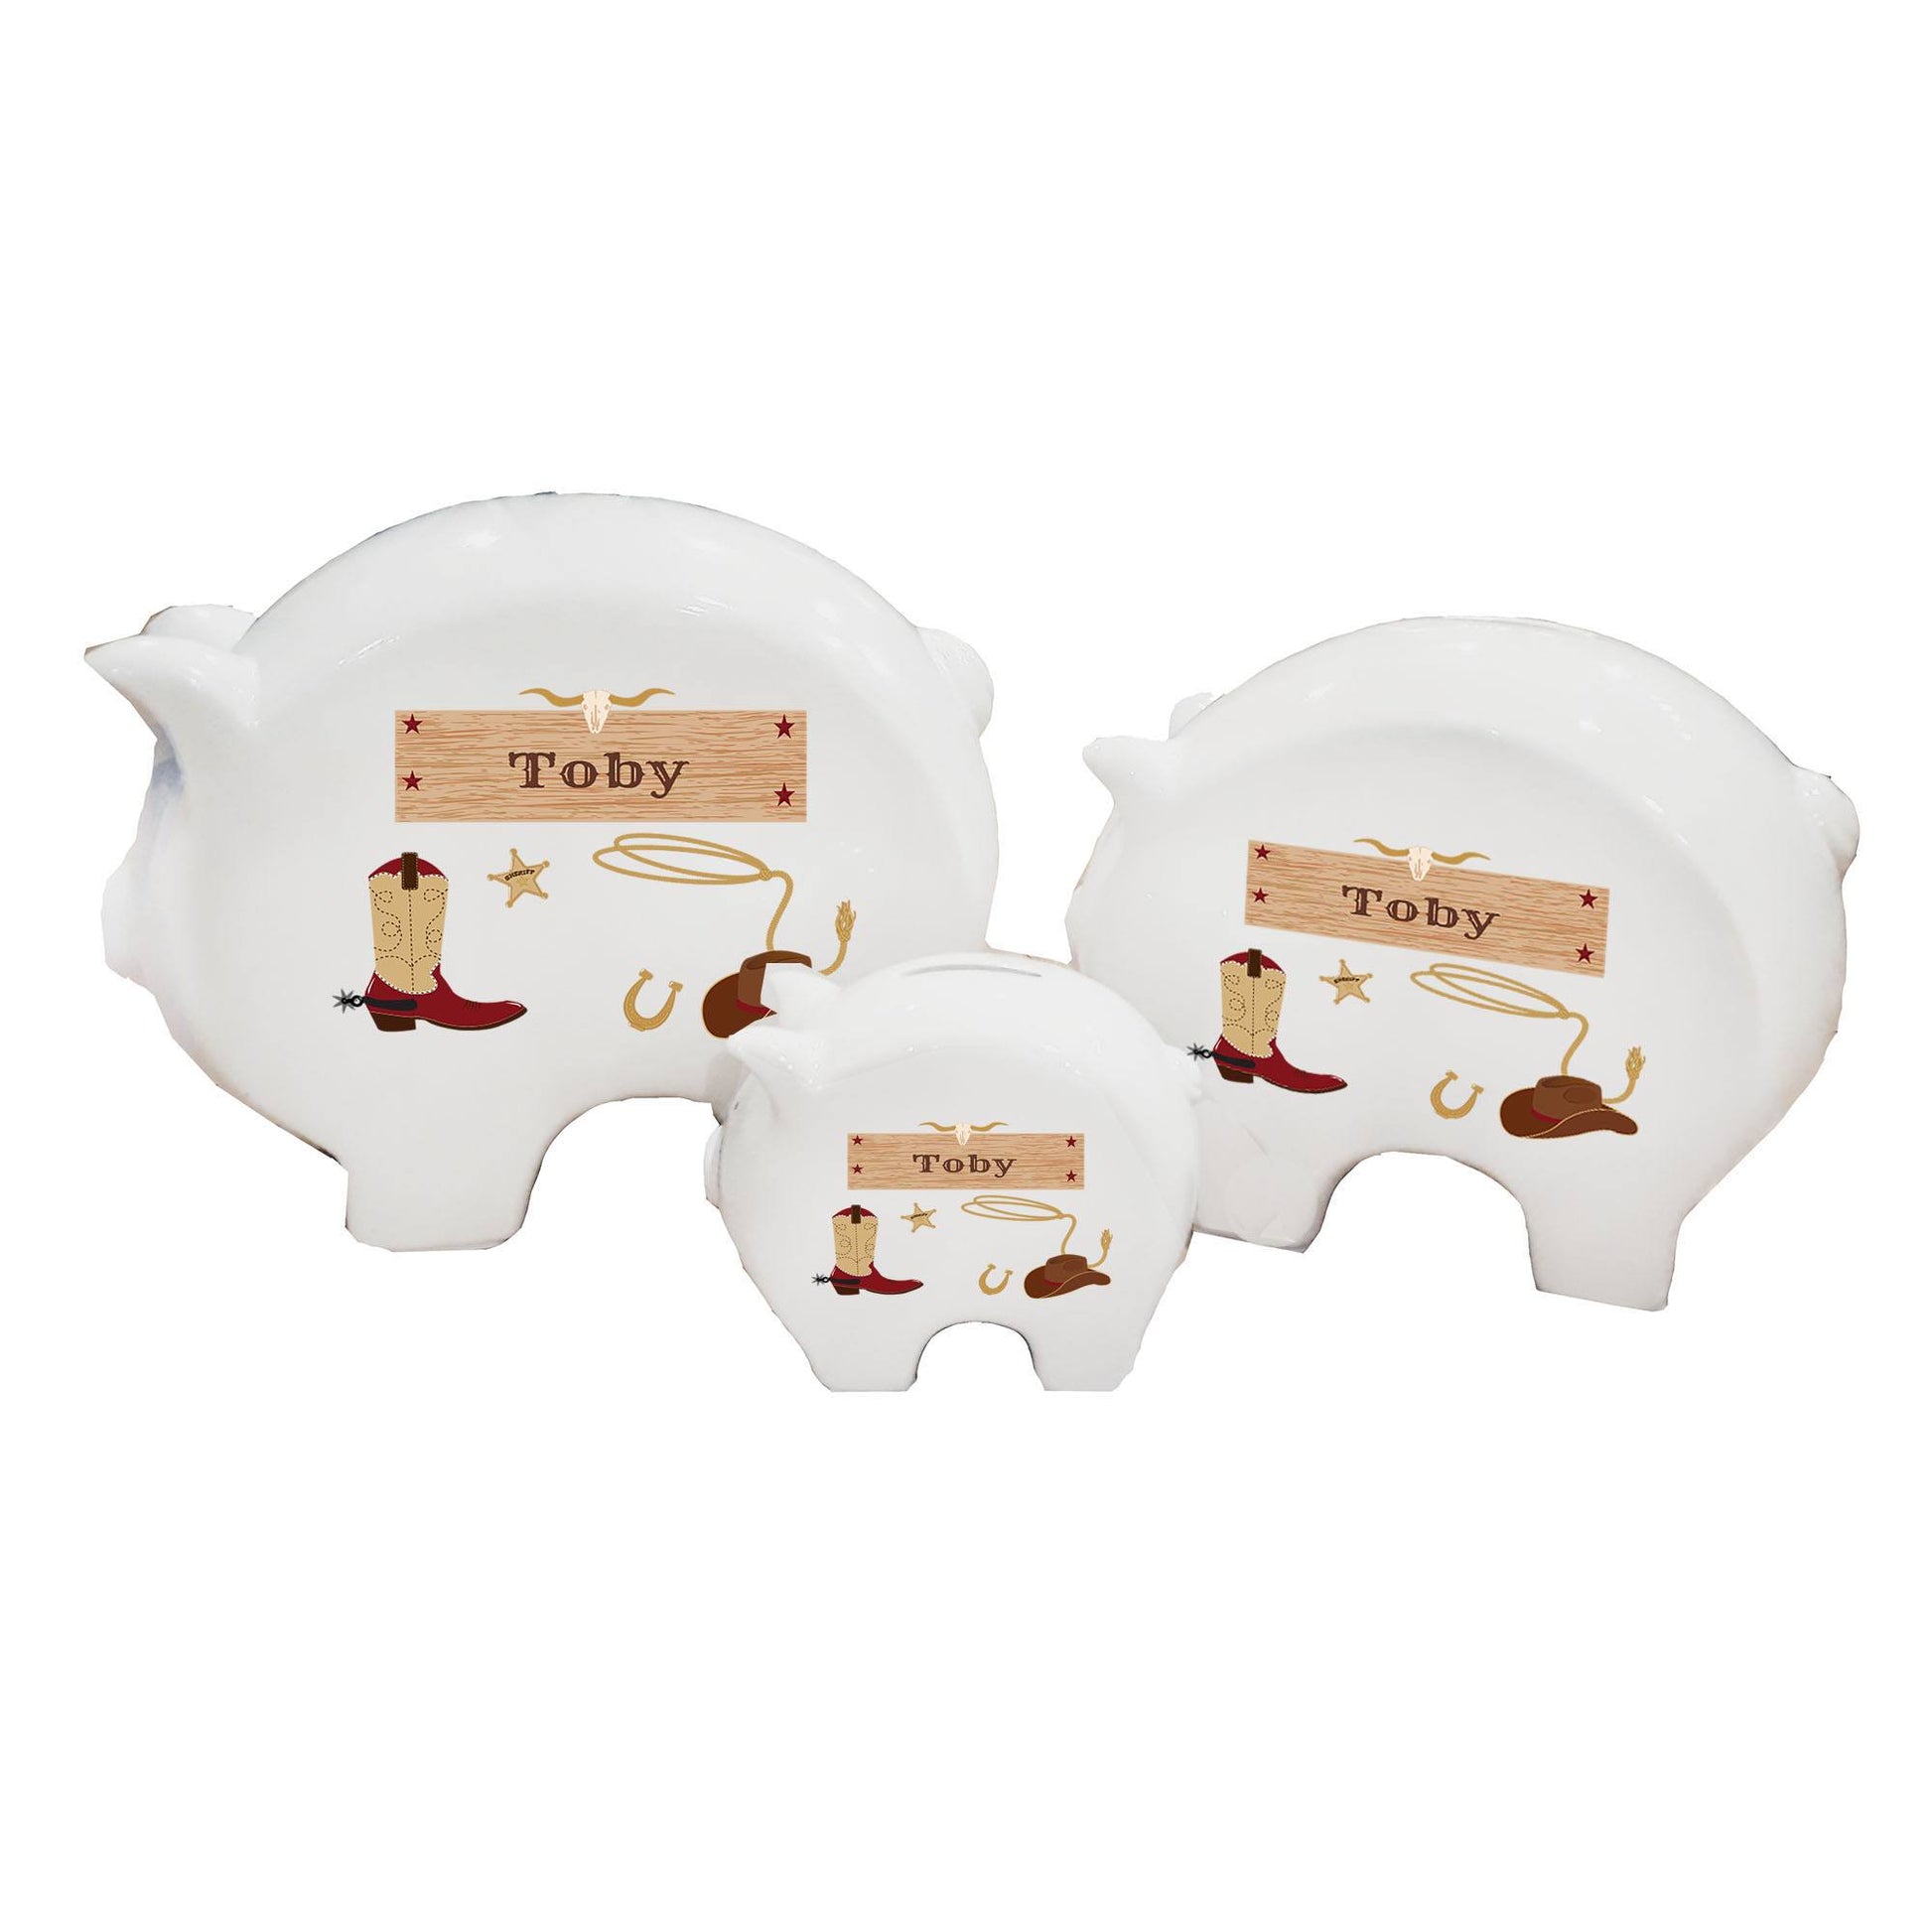 Personalized Piggy Bank with Wild West design